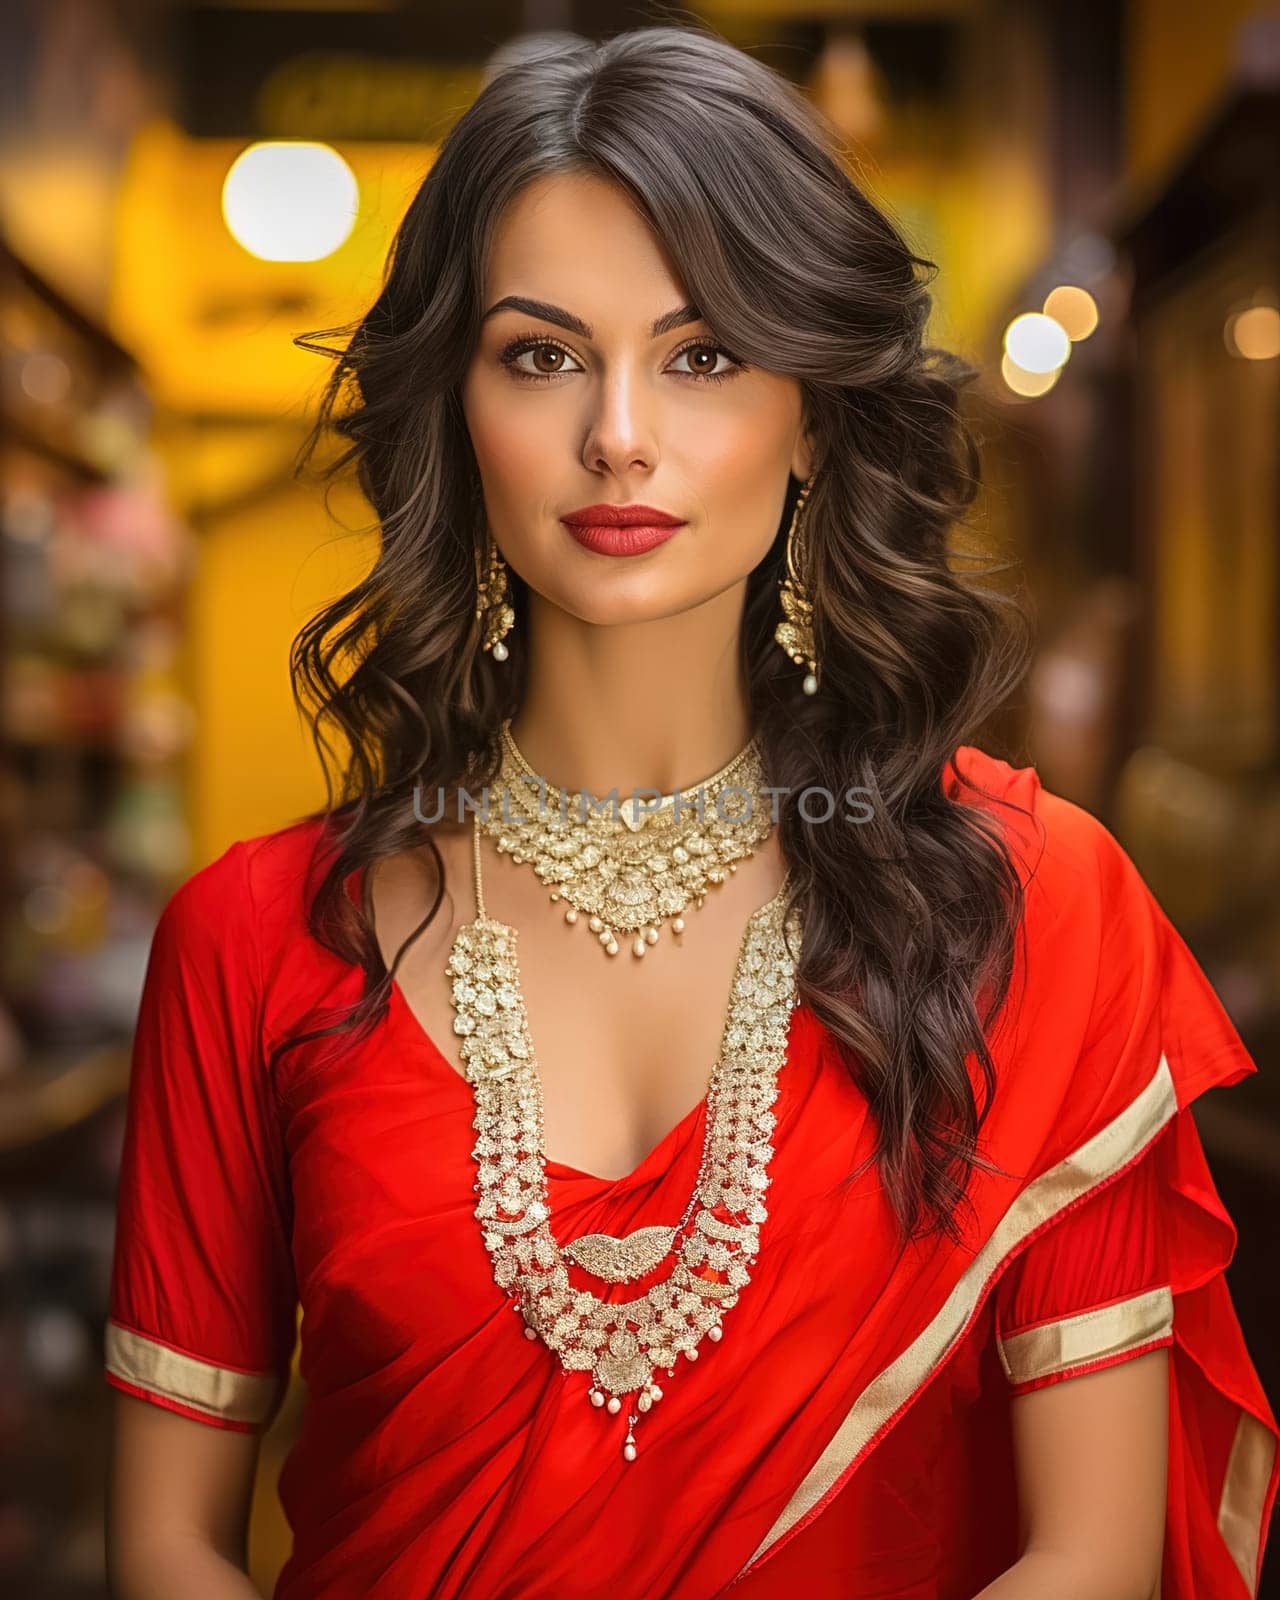 Portrait of Indian woman in red sari with jewelry. by Yurich32